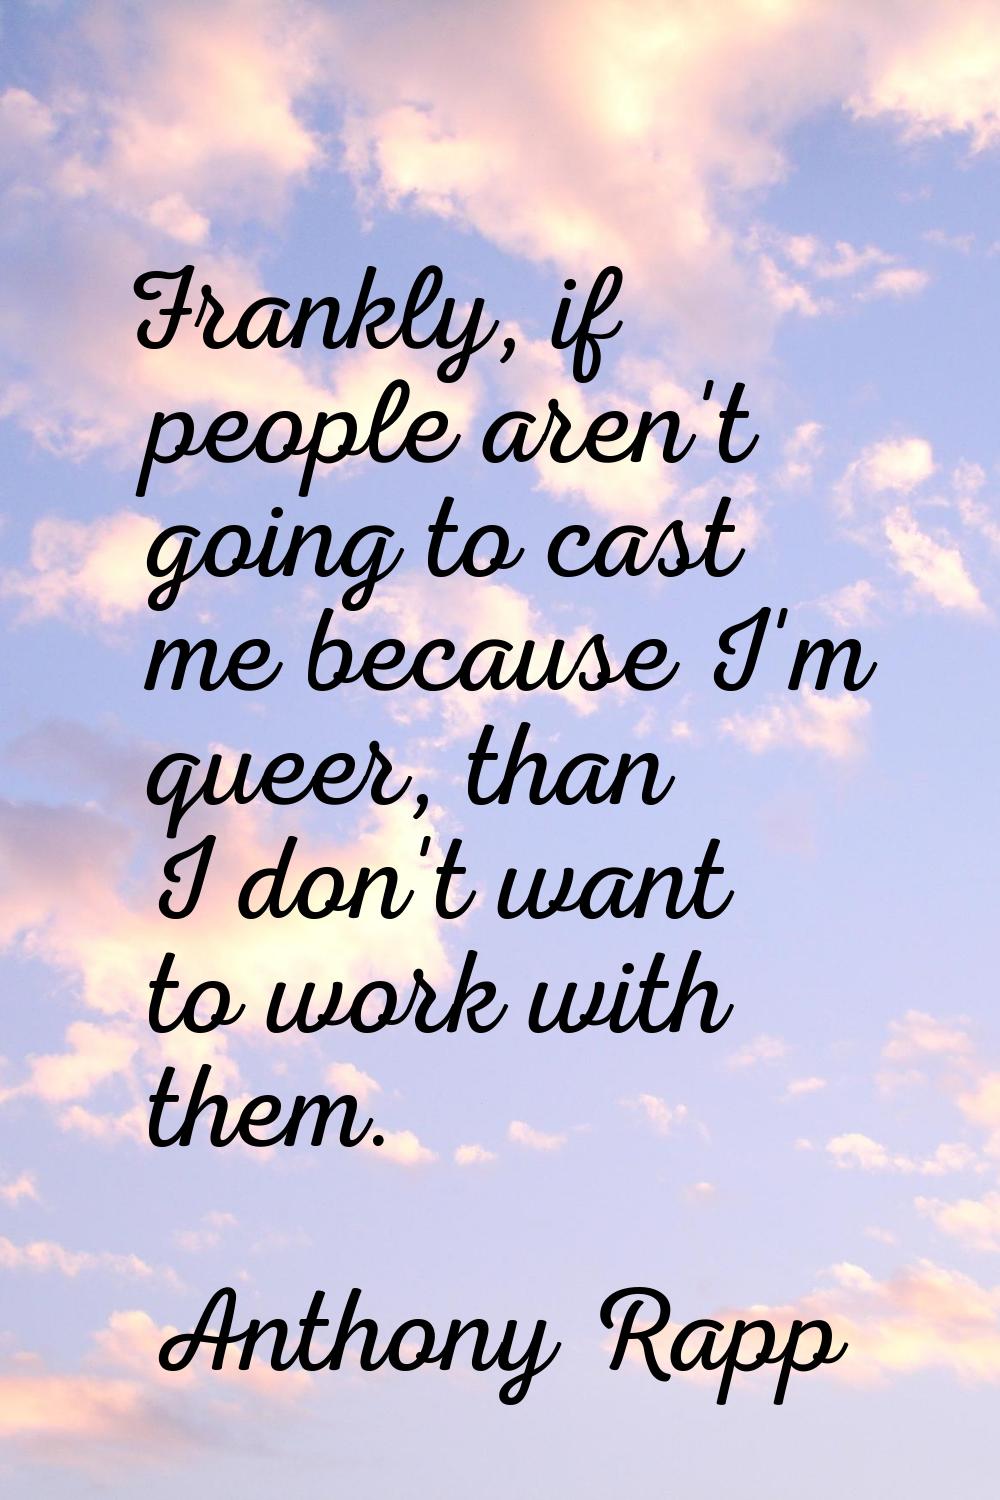 Frankly, if people aren't going to cast me because I'm queer, than I don't want to work with them.